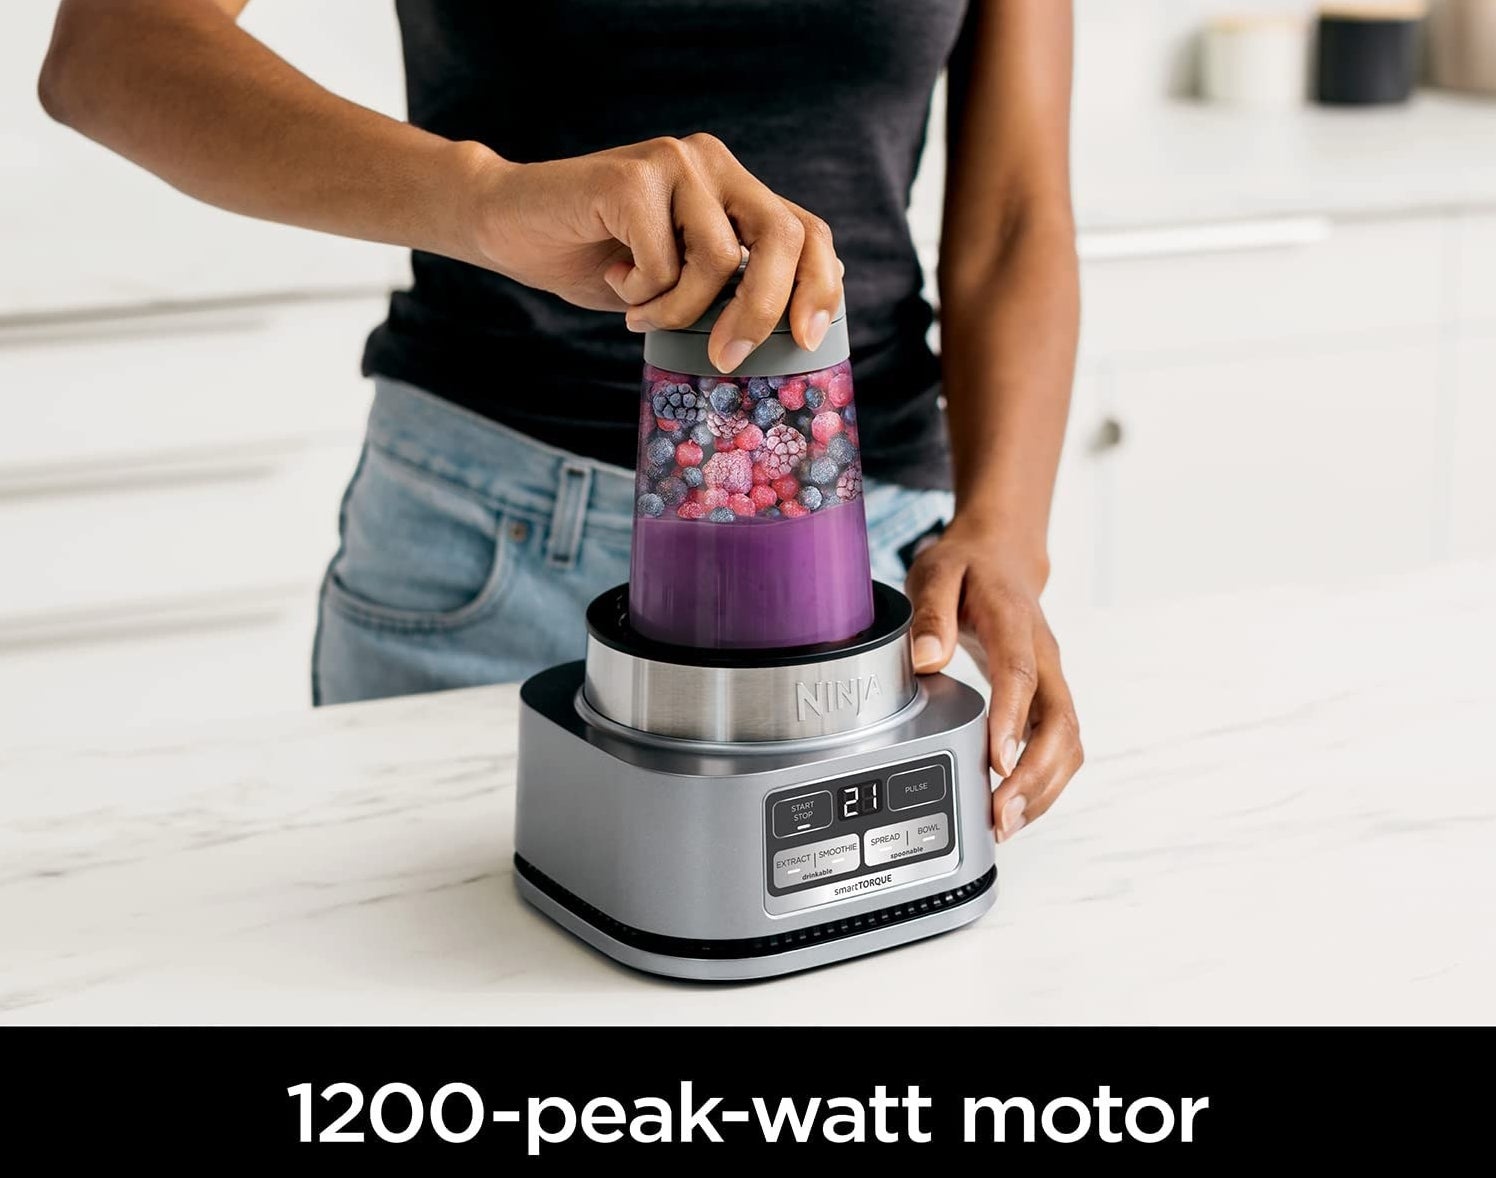 Model using the blender to make a smoothie